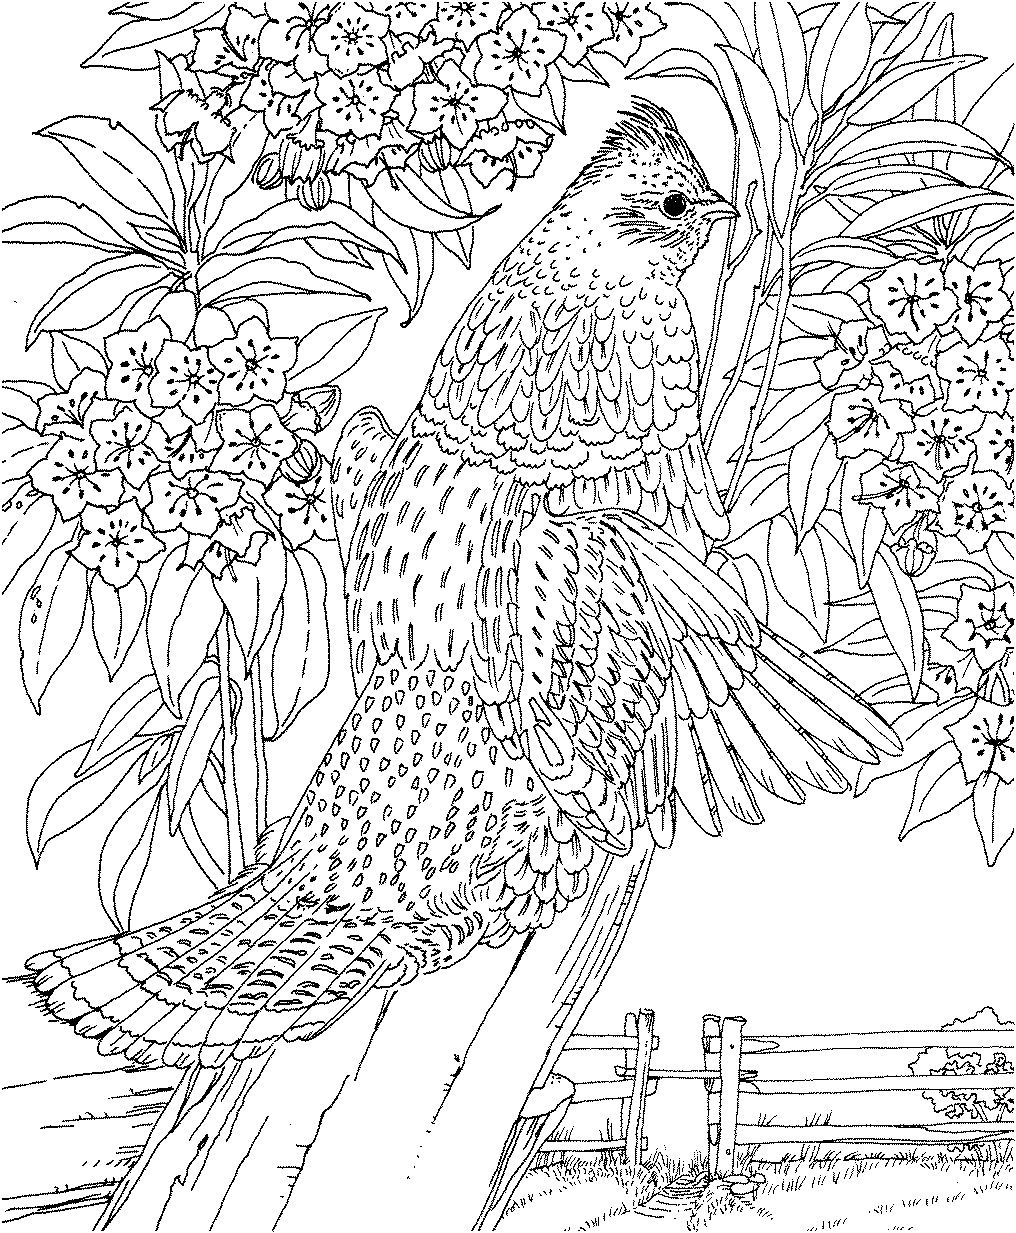 Difficult animals coloring pages for adults abstract coloring pages detailed coloring pages animal coloring pages